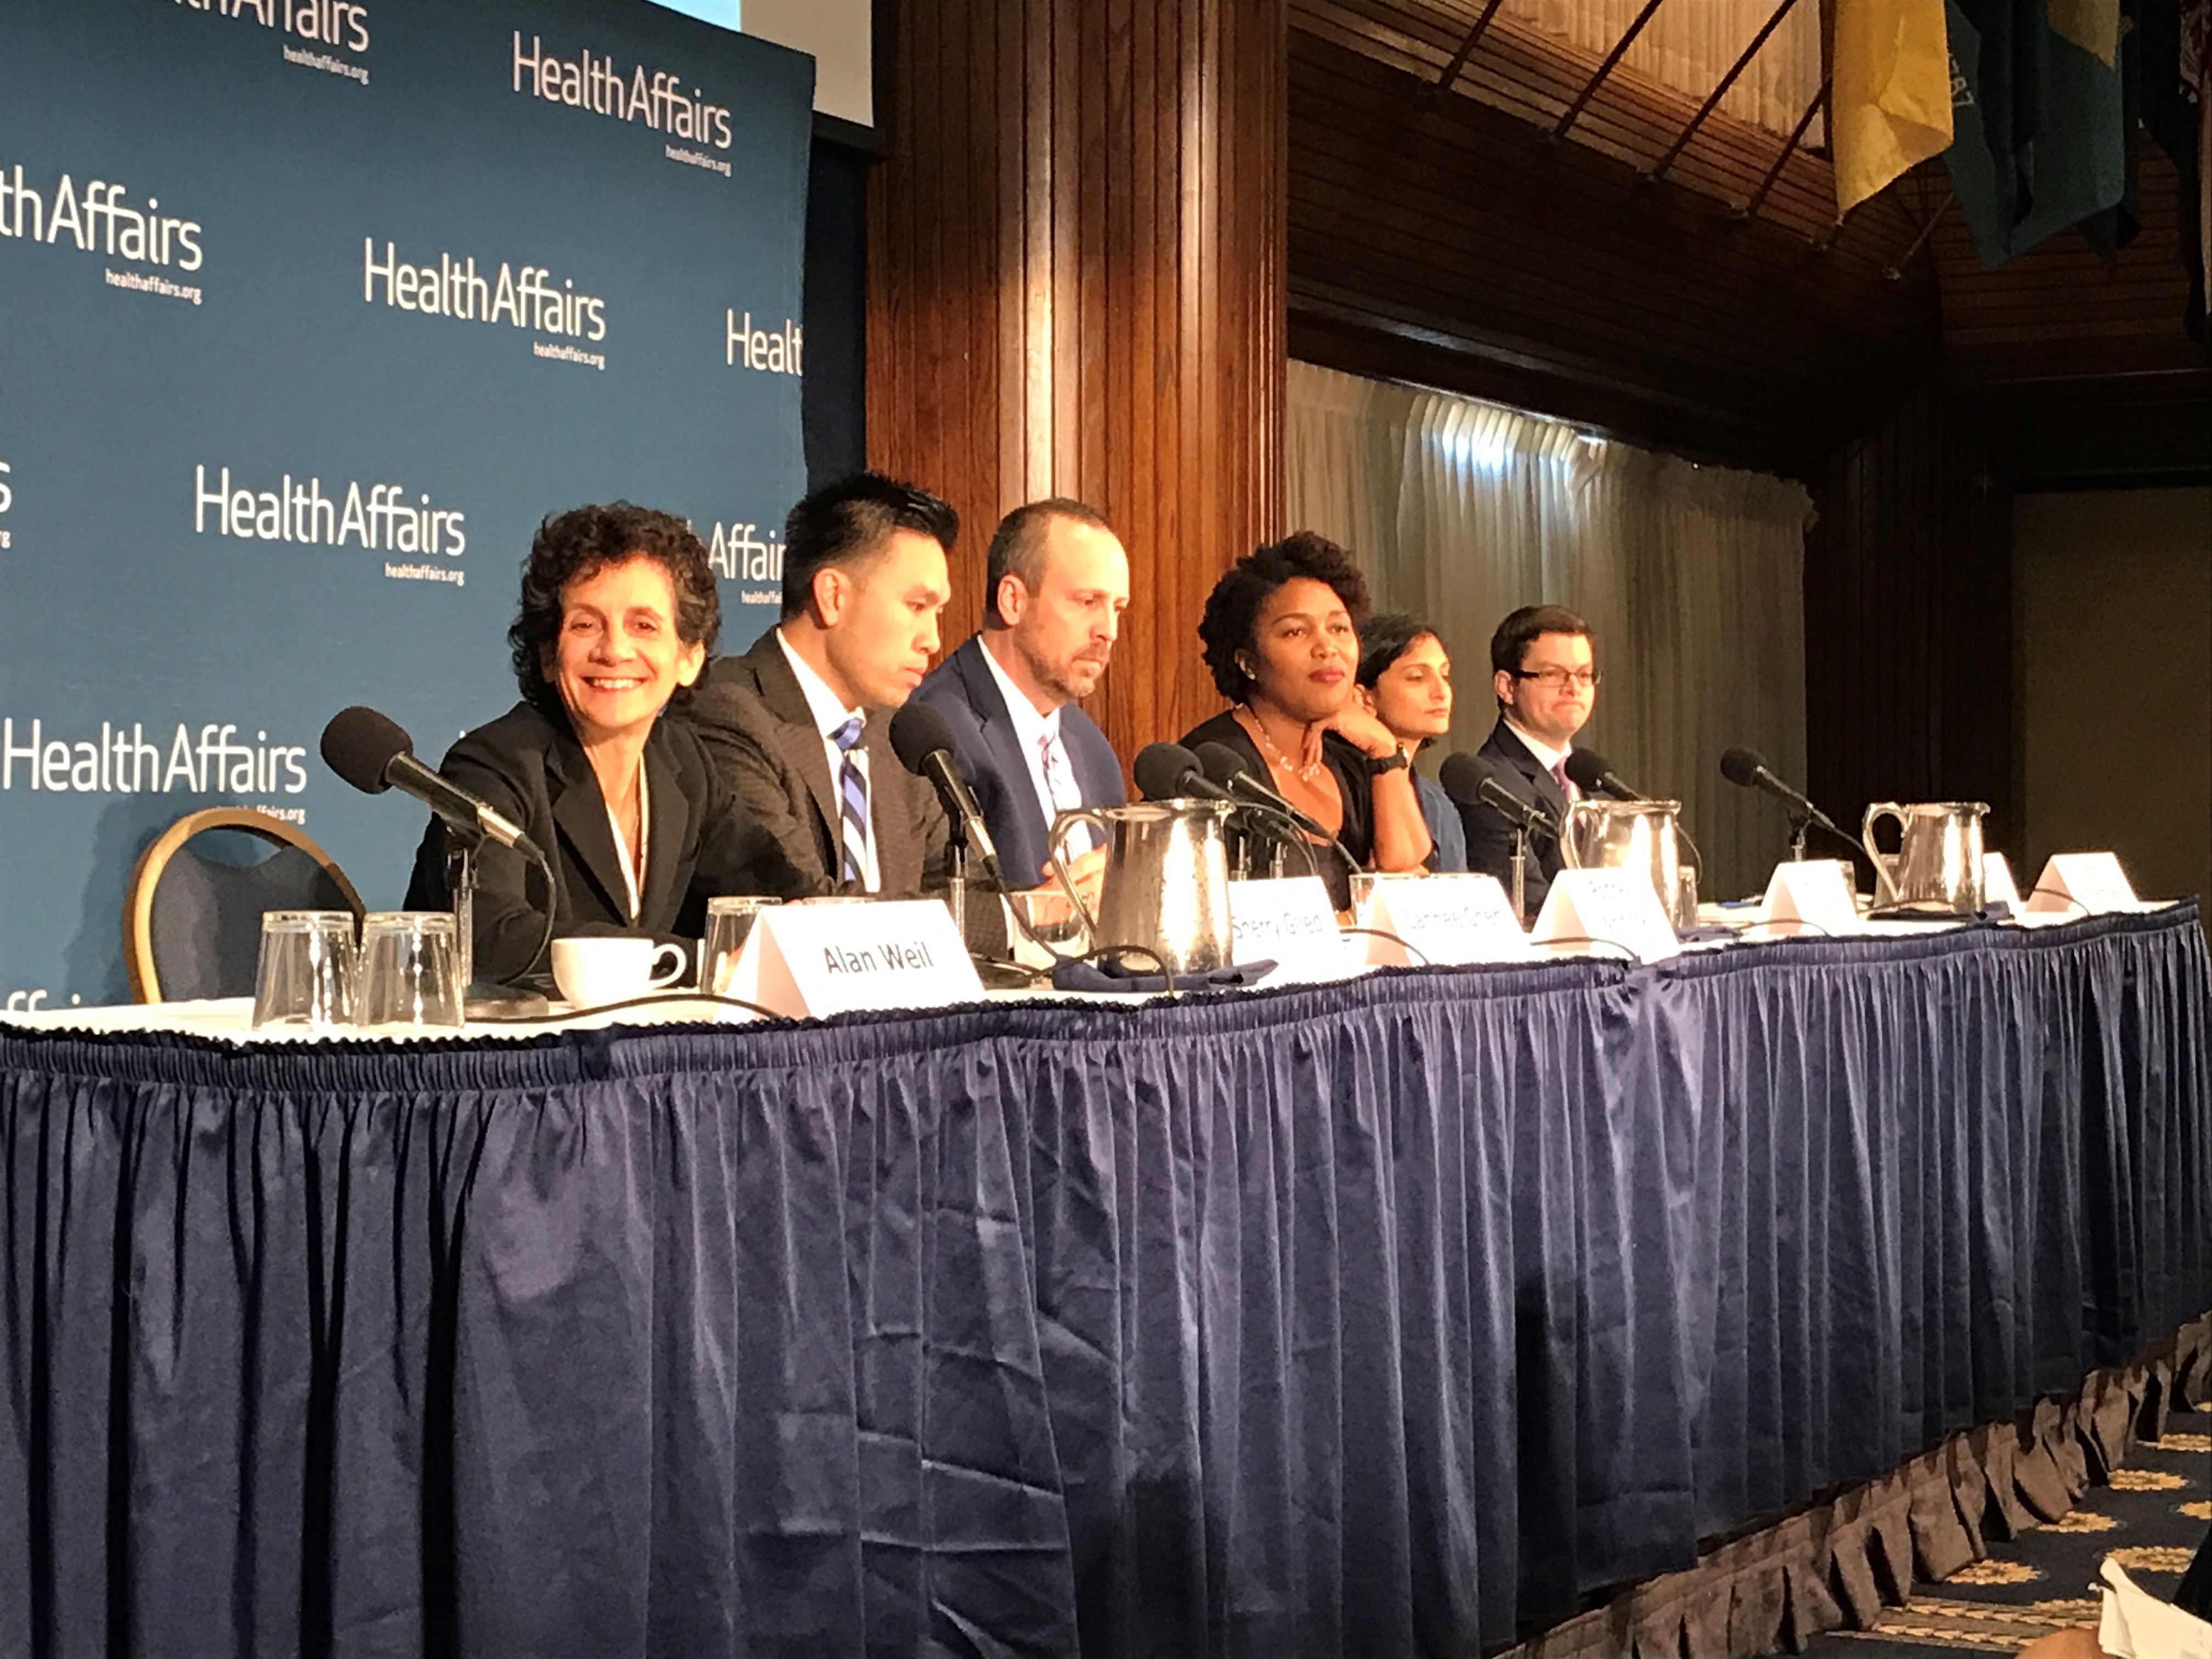 Sherry Glied Lanhee Chen and other panelists at a Health Affairs event on 111618